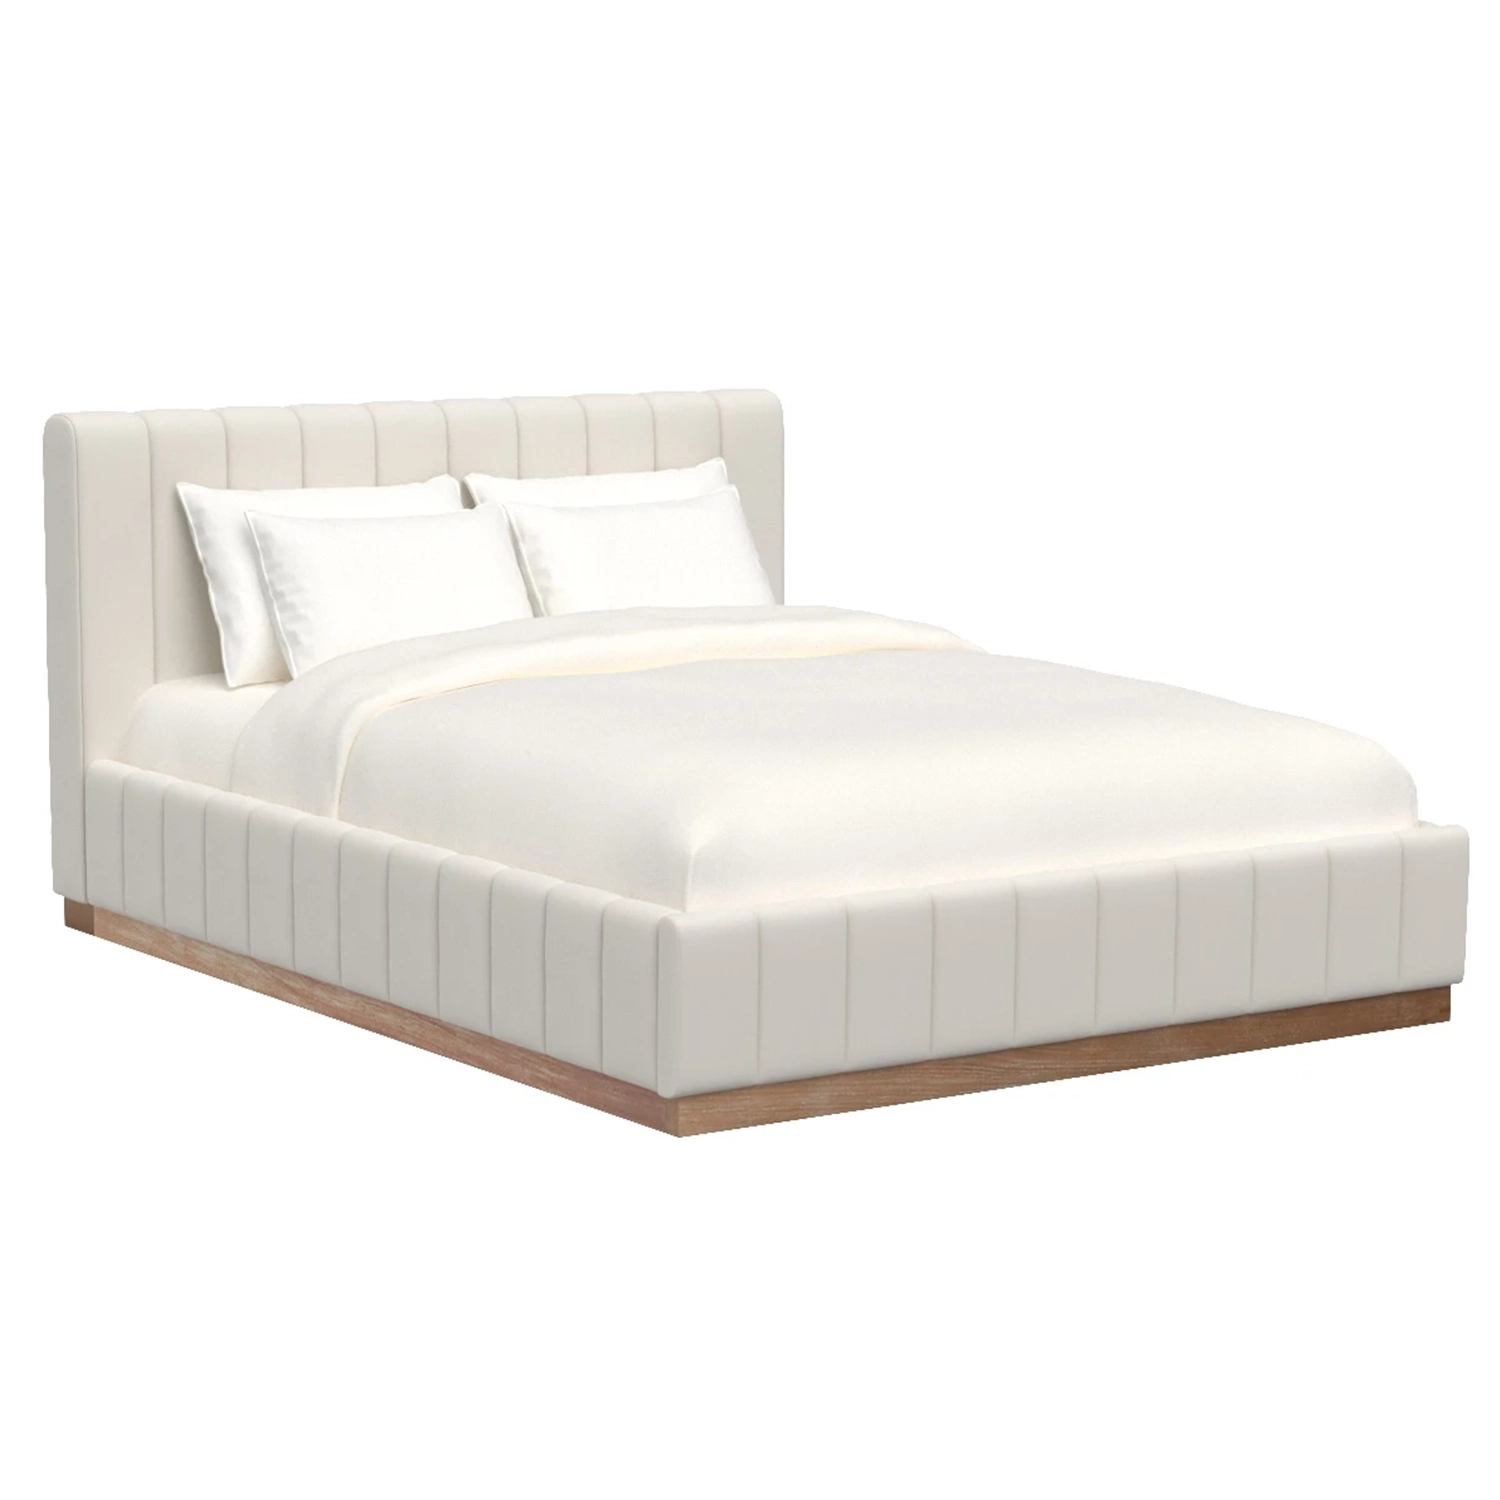 Modern Beds Collection 04 3D Model_05